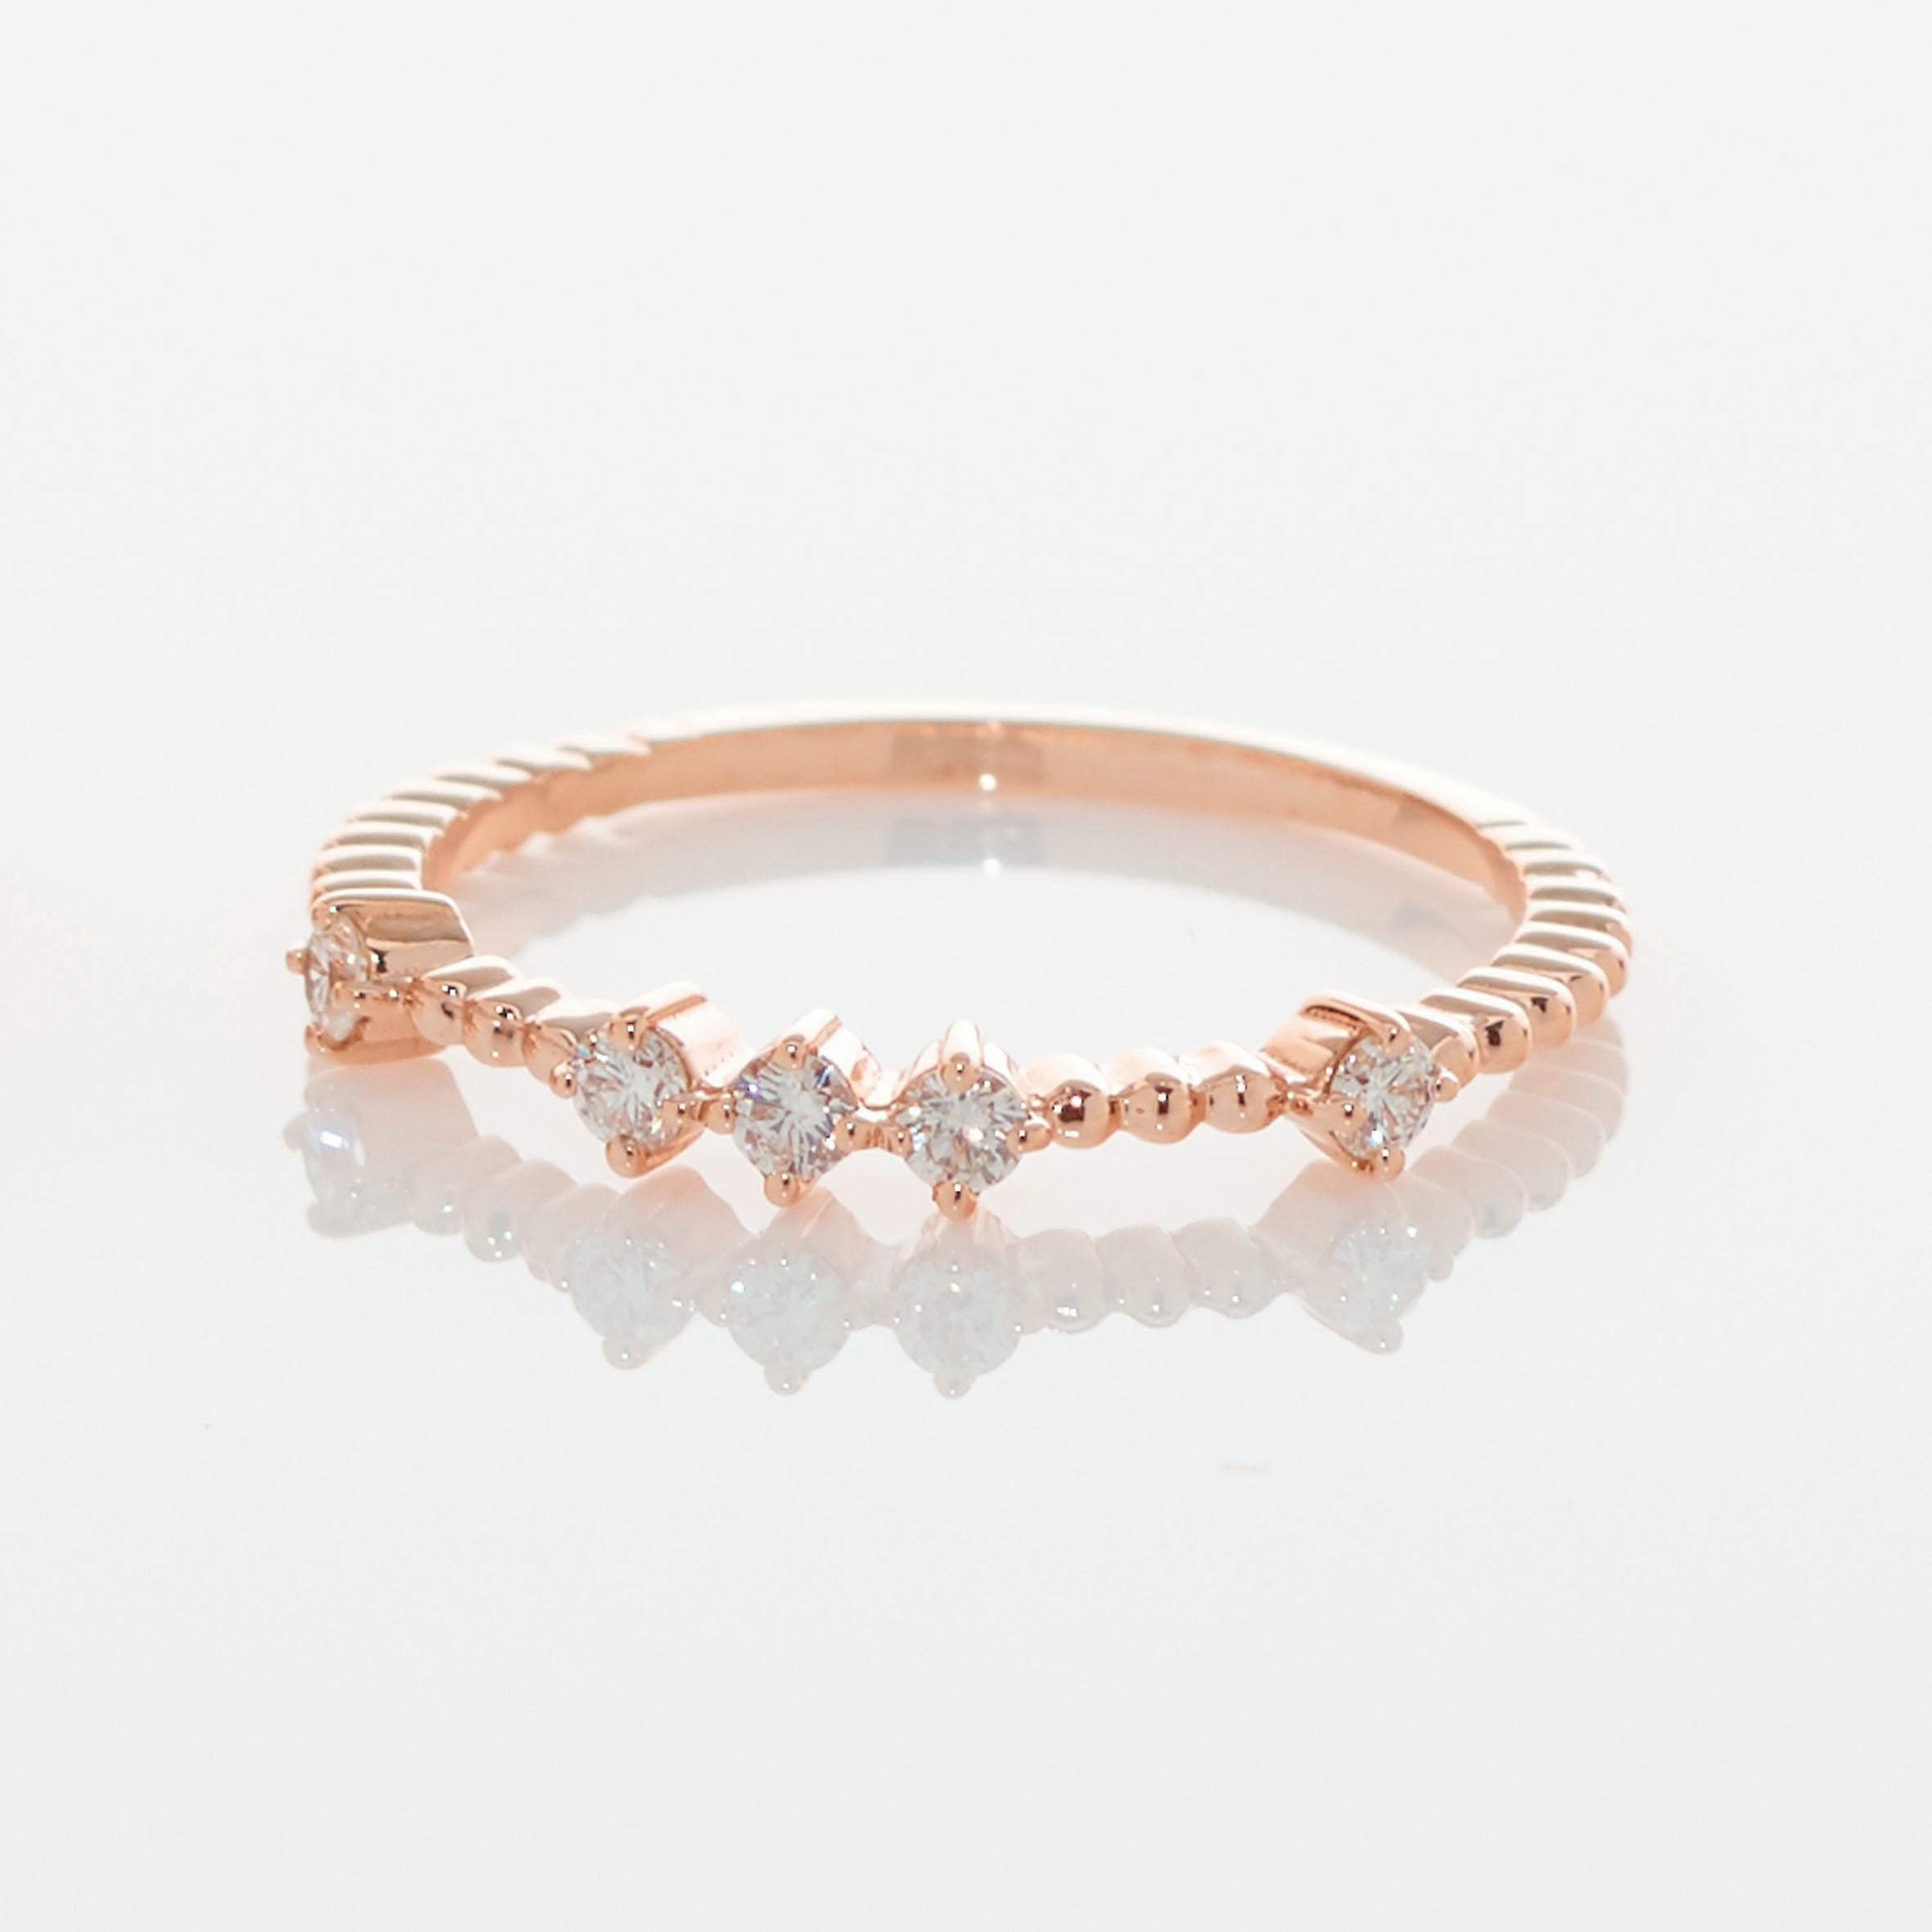 Contemporary Anabela Chan Fine Sustainable Jewelry Rose Gold Petite 5 Diamond Ring For Sale